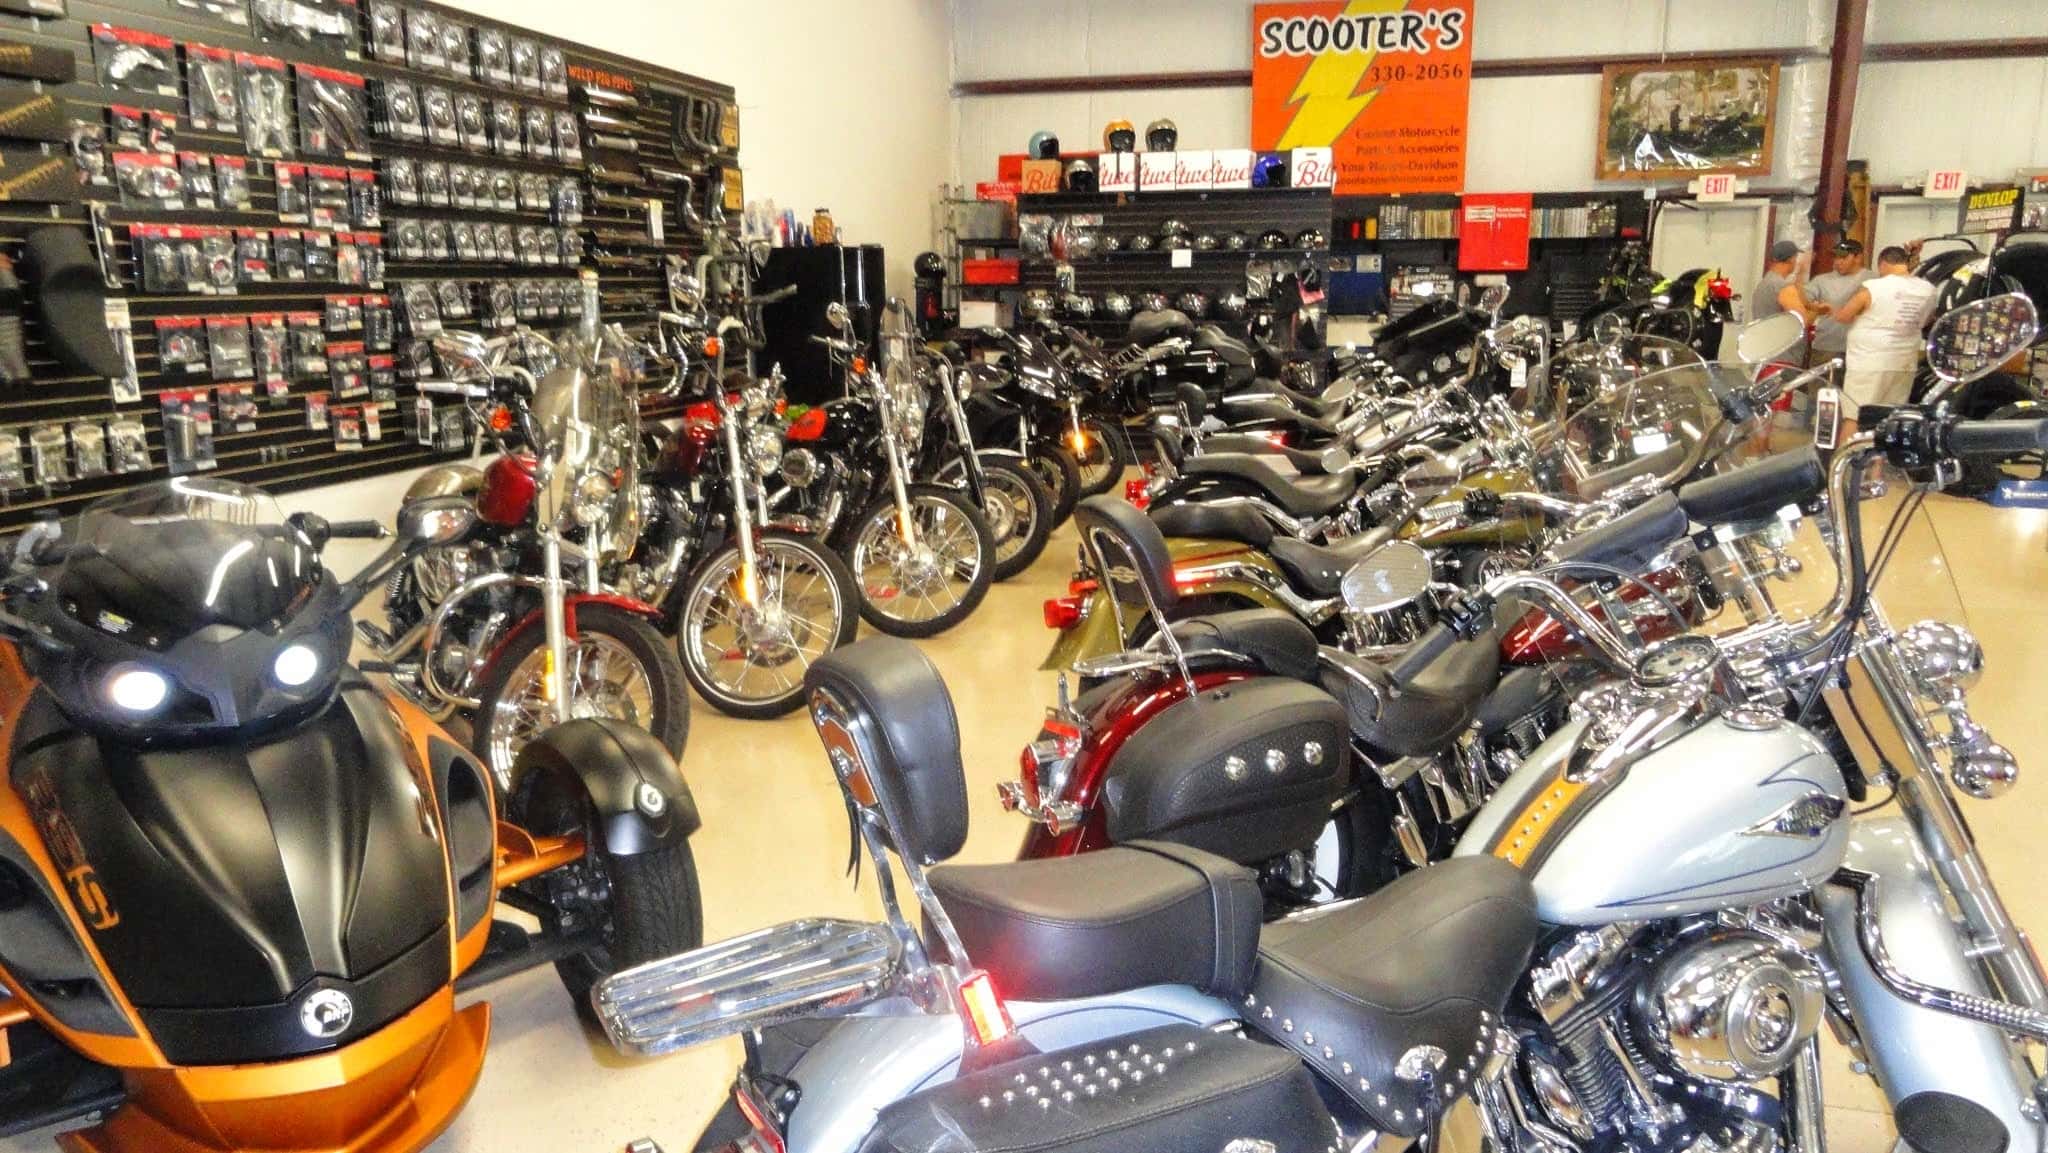 Scooters Performance Parts & Accessories - Sorrento, FL, US, custom motorcycle shop